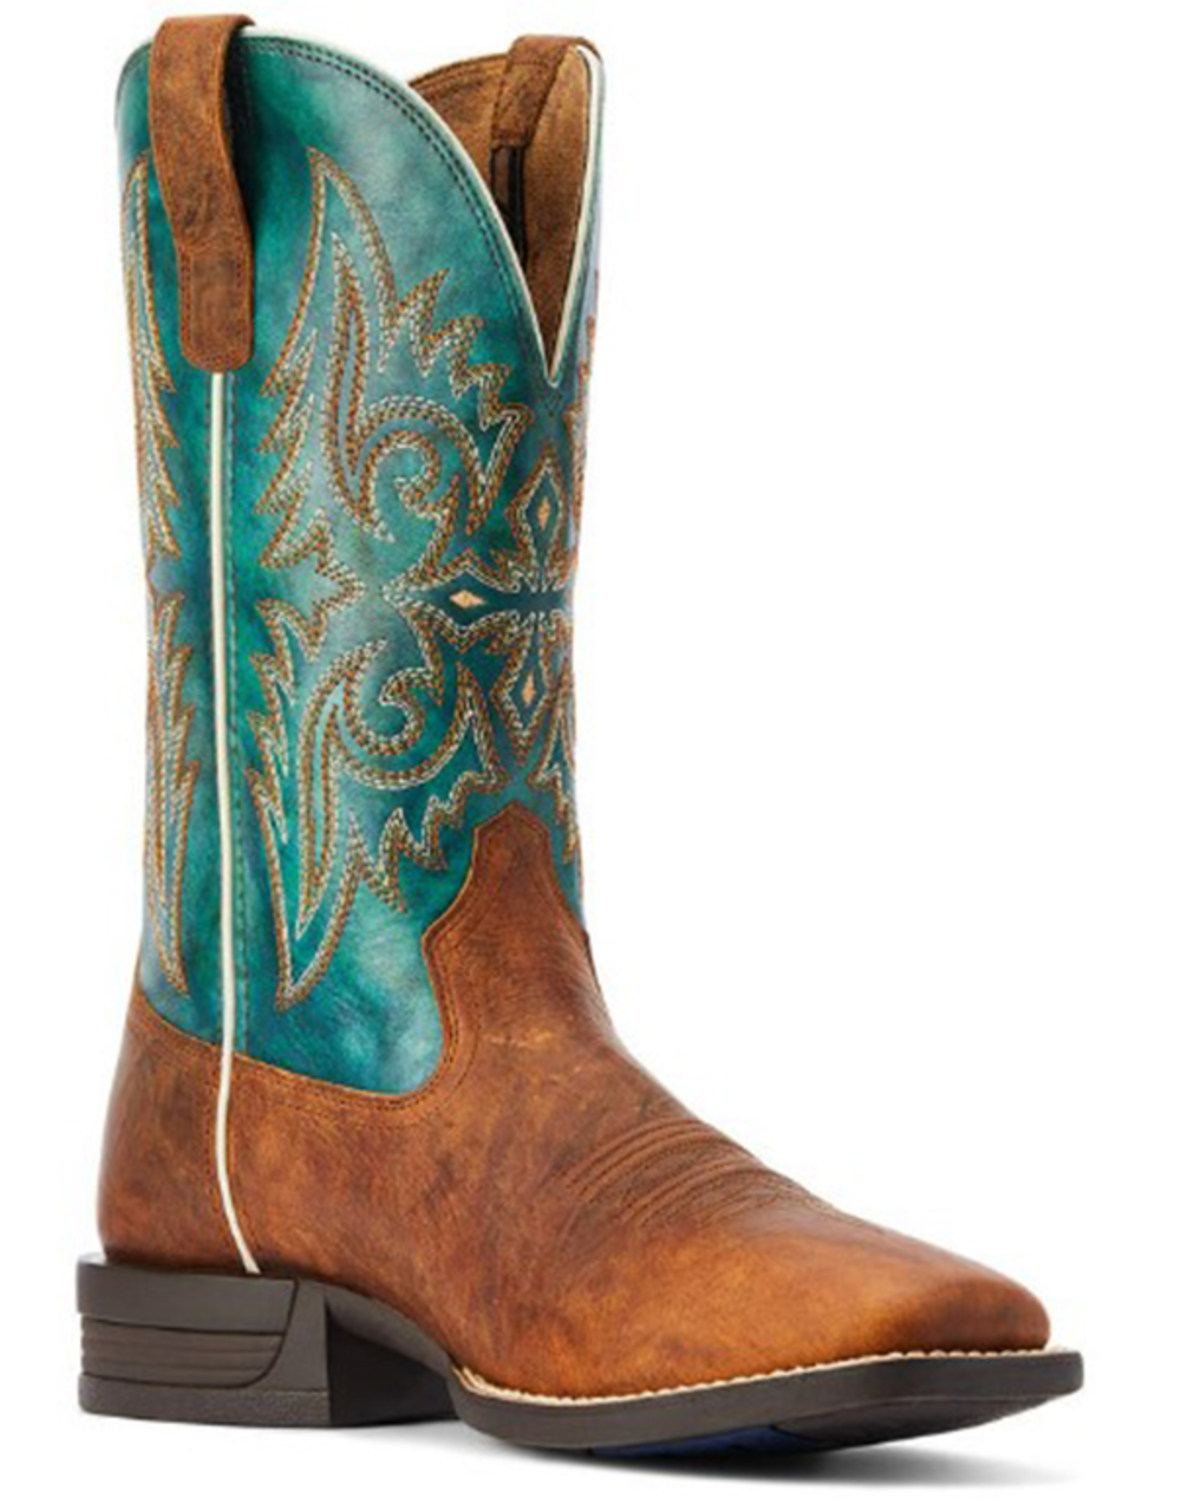 Ariat Men's Wild Thang Western Performance Boots - Broad Square Toe